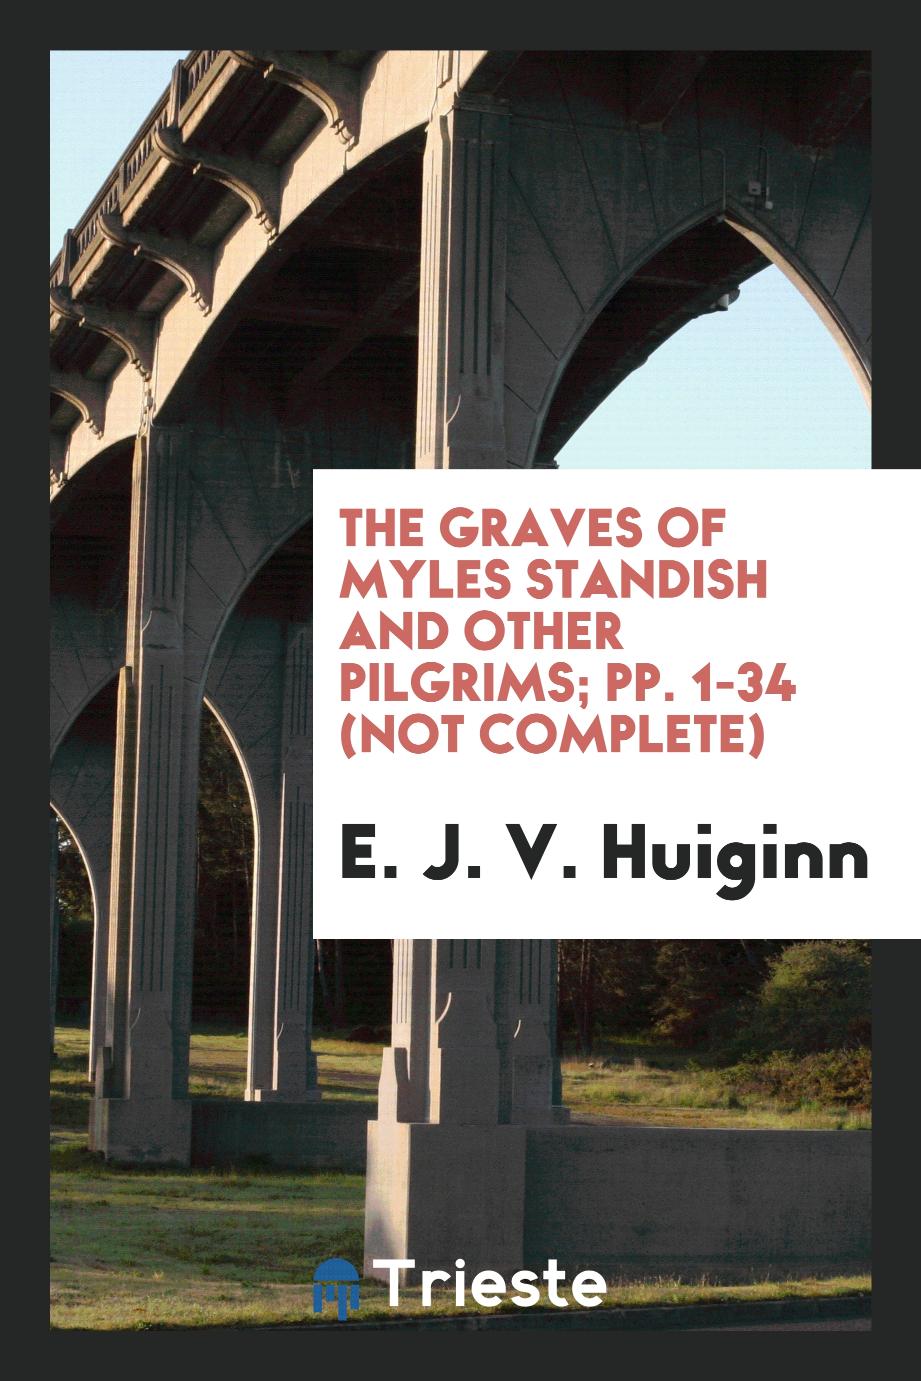 The Graves of Myles Standish and Other Pilgrims; pp. 1-34 (Not complete)